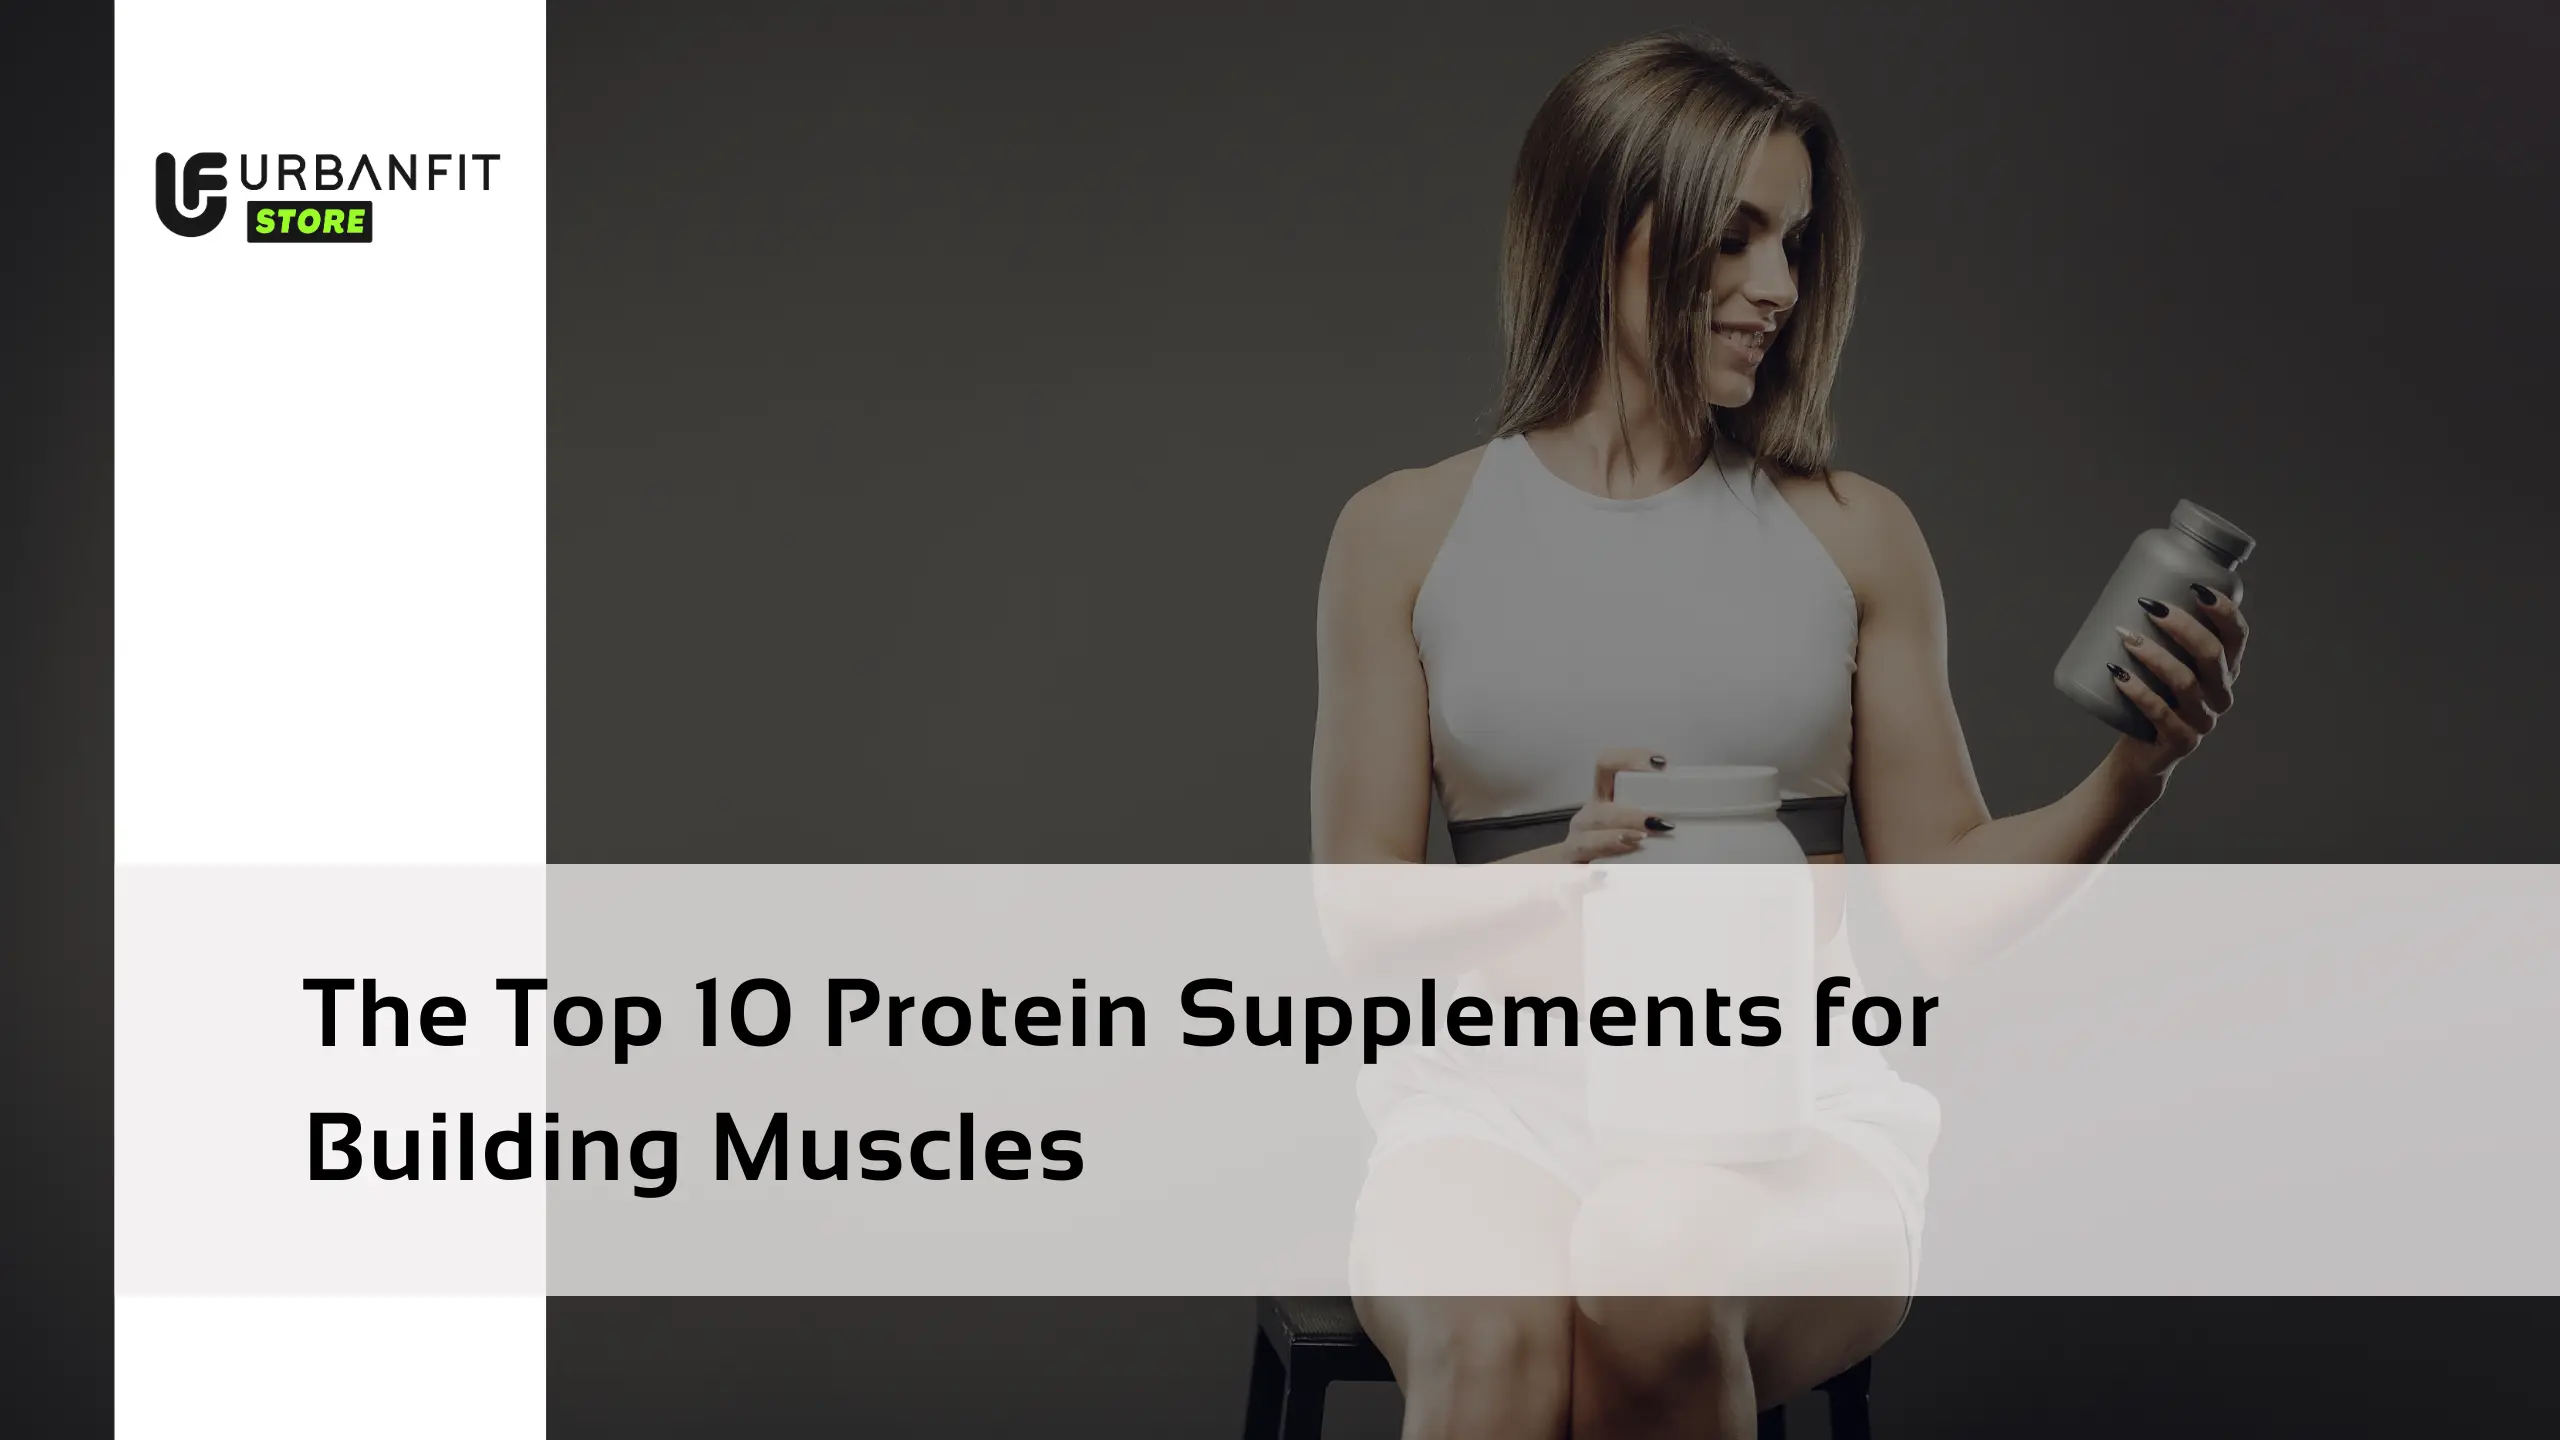 The Top 10 Protein Supplements for Building Muscles